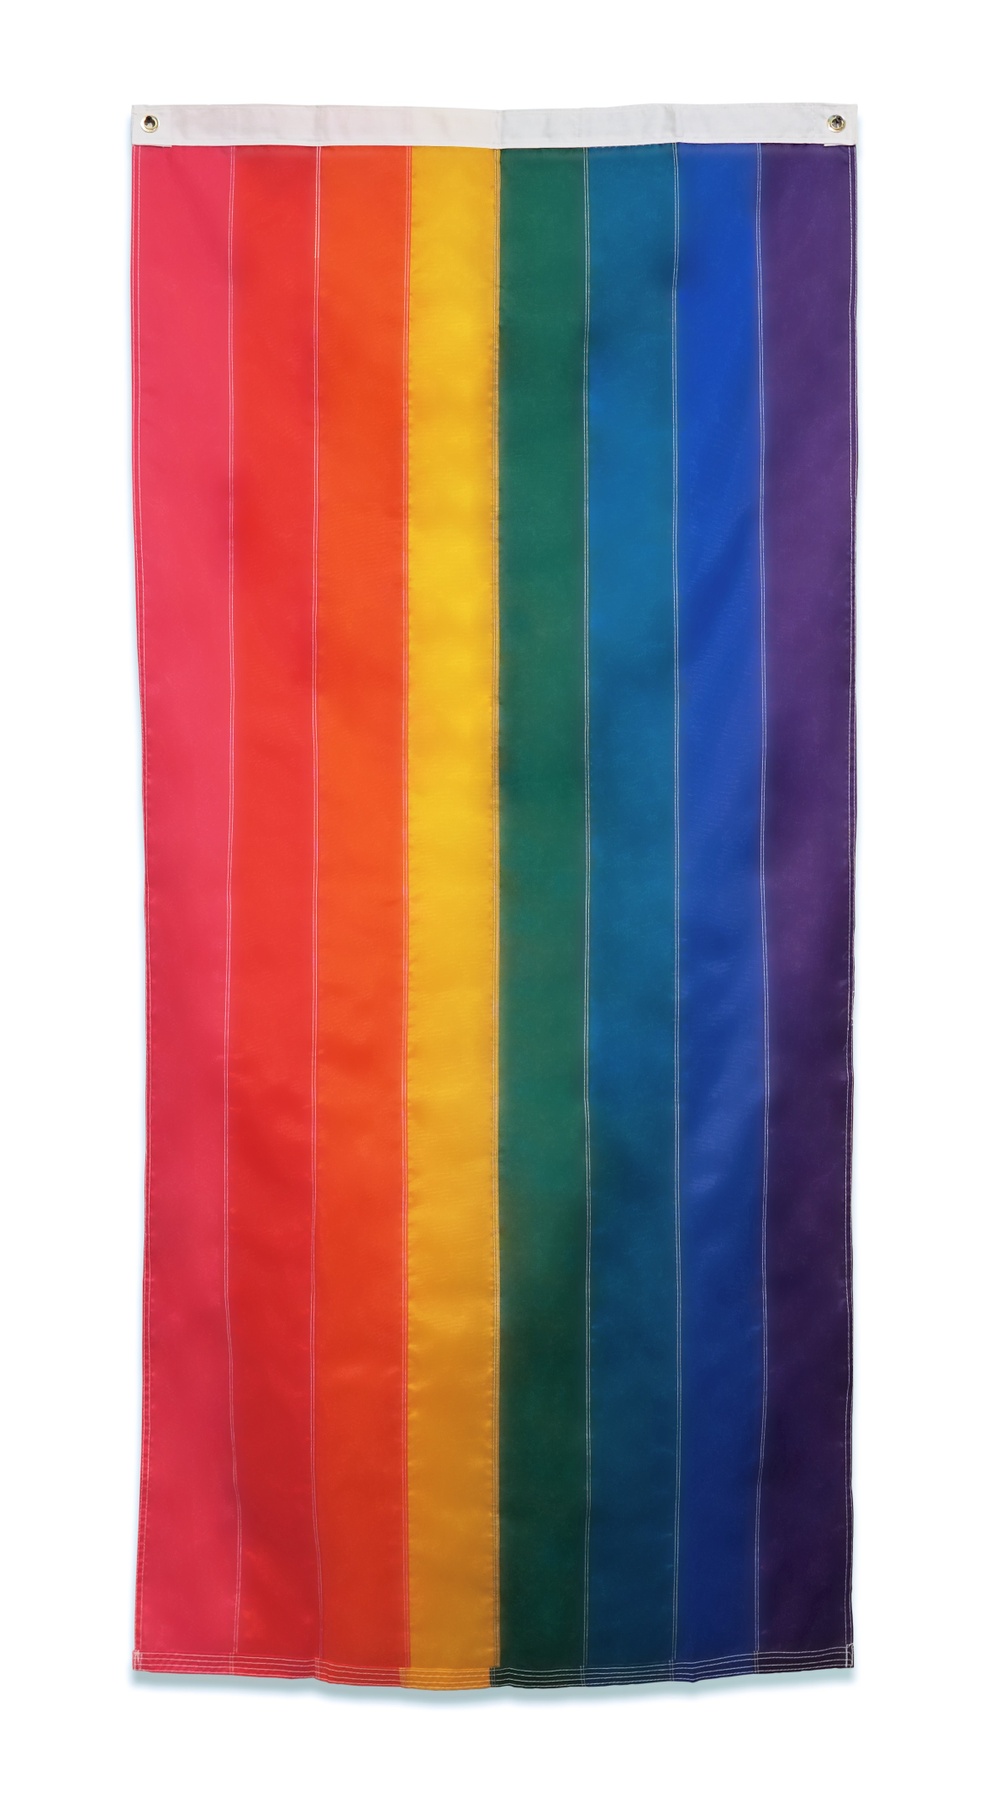 A large flag with eight color stripes that make a rainbow.